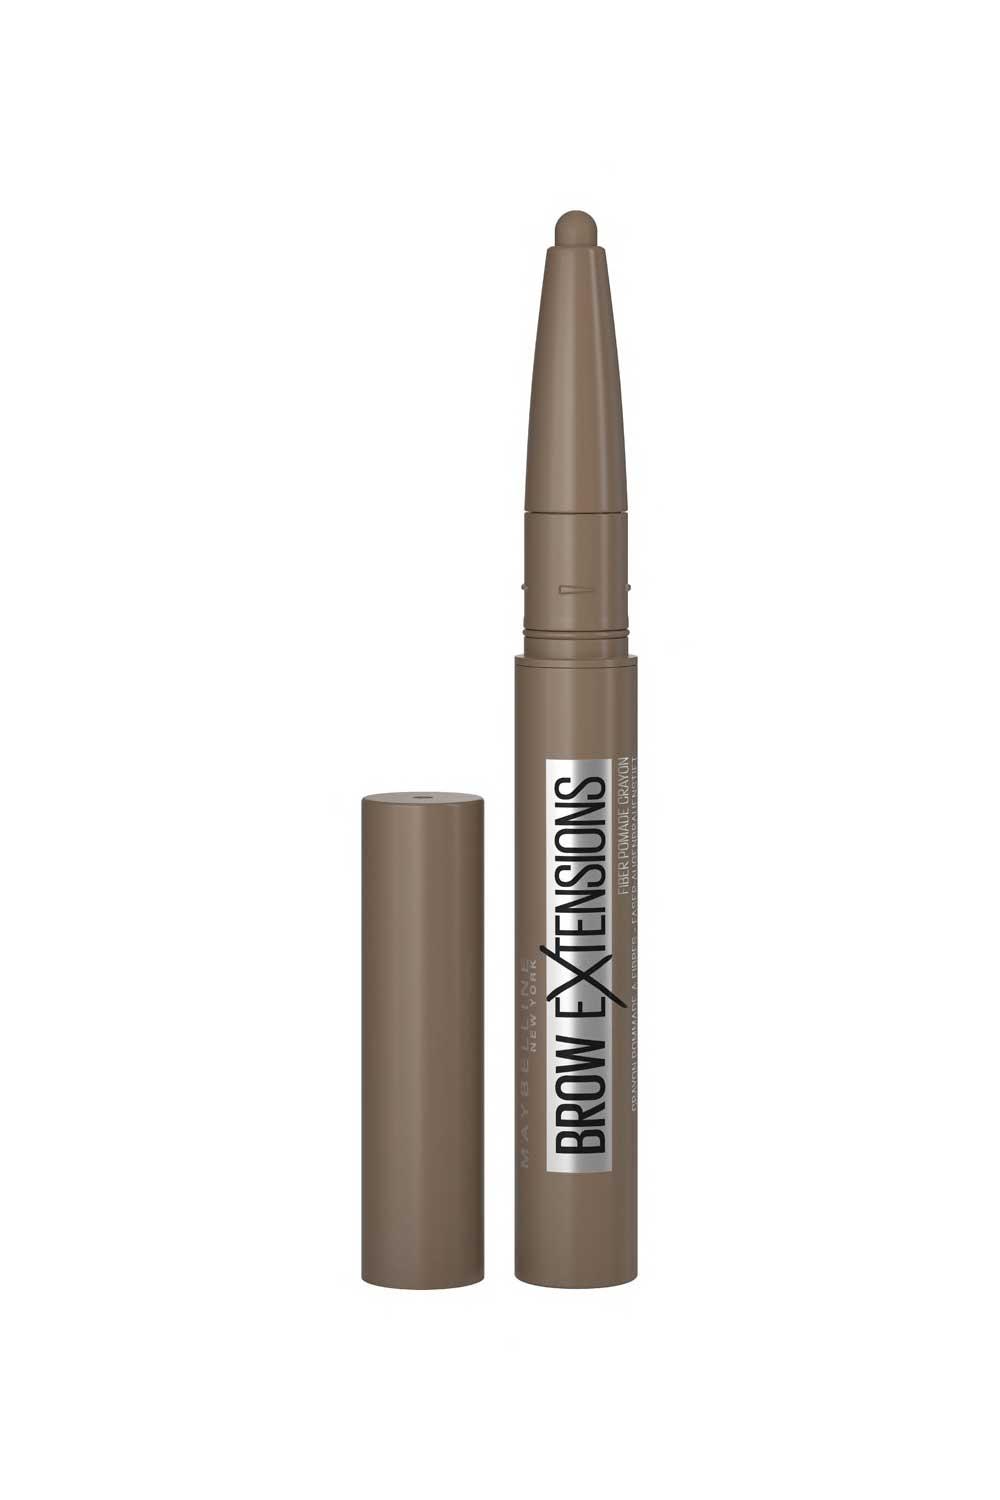 Mayybelina. Stick de cejas Brow Extensions, Maybelline